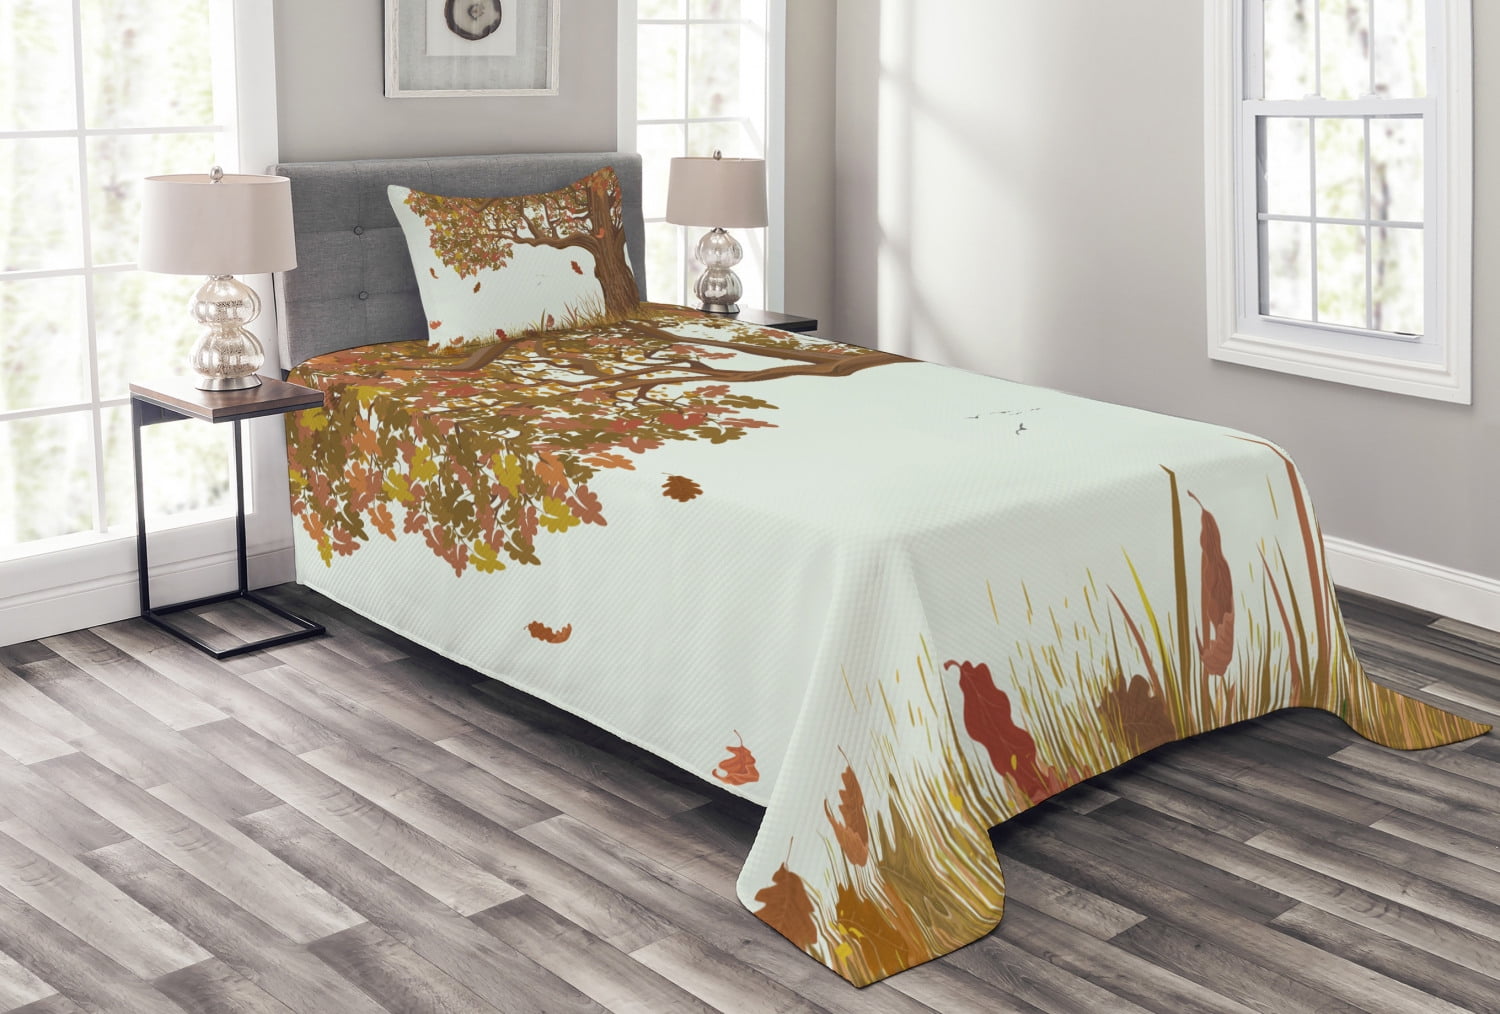 Twin Size Ambesonne Fall Bedspread Tan Yellow Swirling Autumn Leaves Shady Seasonal Elements Aesthetic Nature Image Decorative Quilted 2 Piece Coverlet Set with Pillow Sham